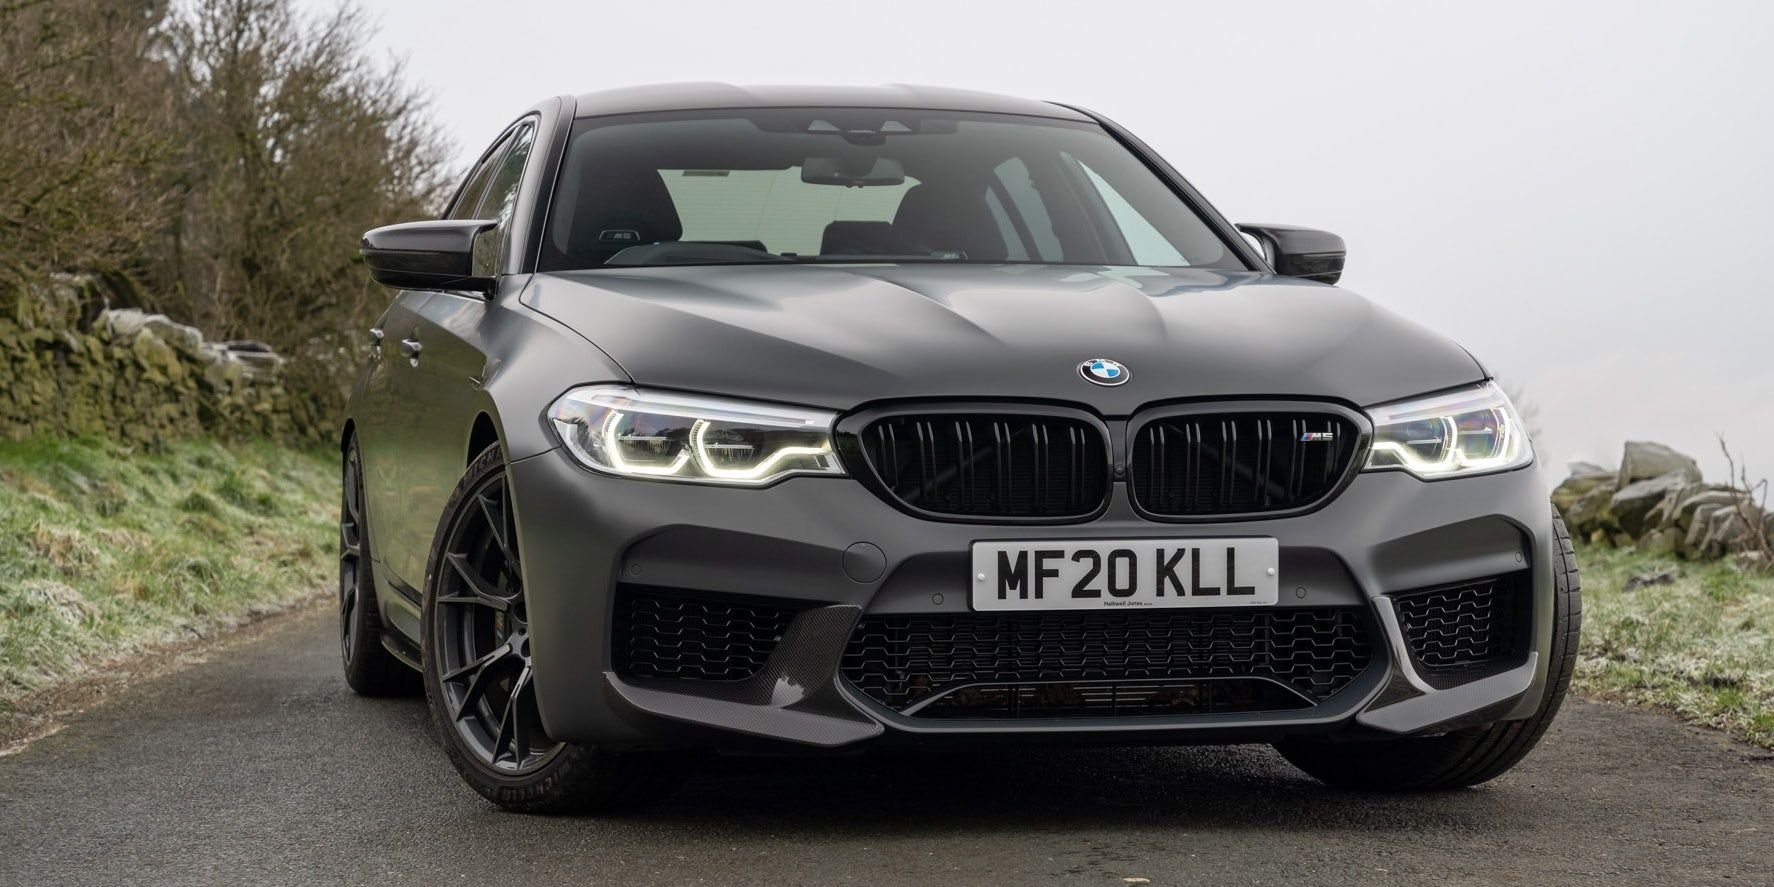 Ranking The 10 Best BMW "M" Models To Buy Used